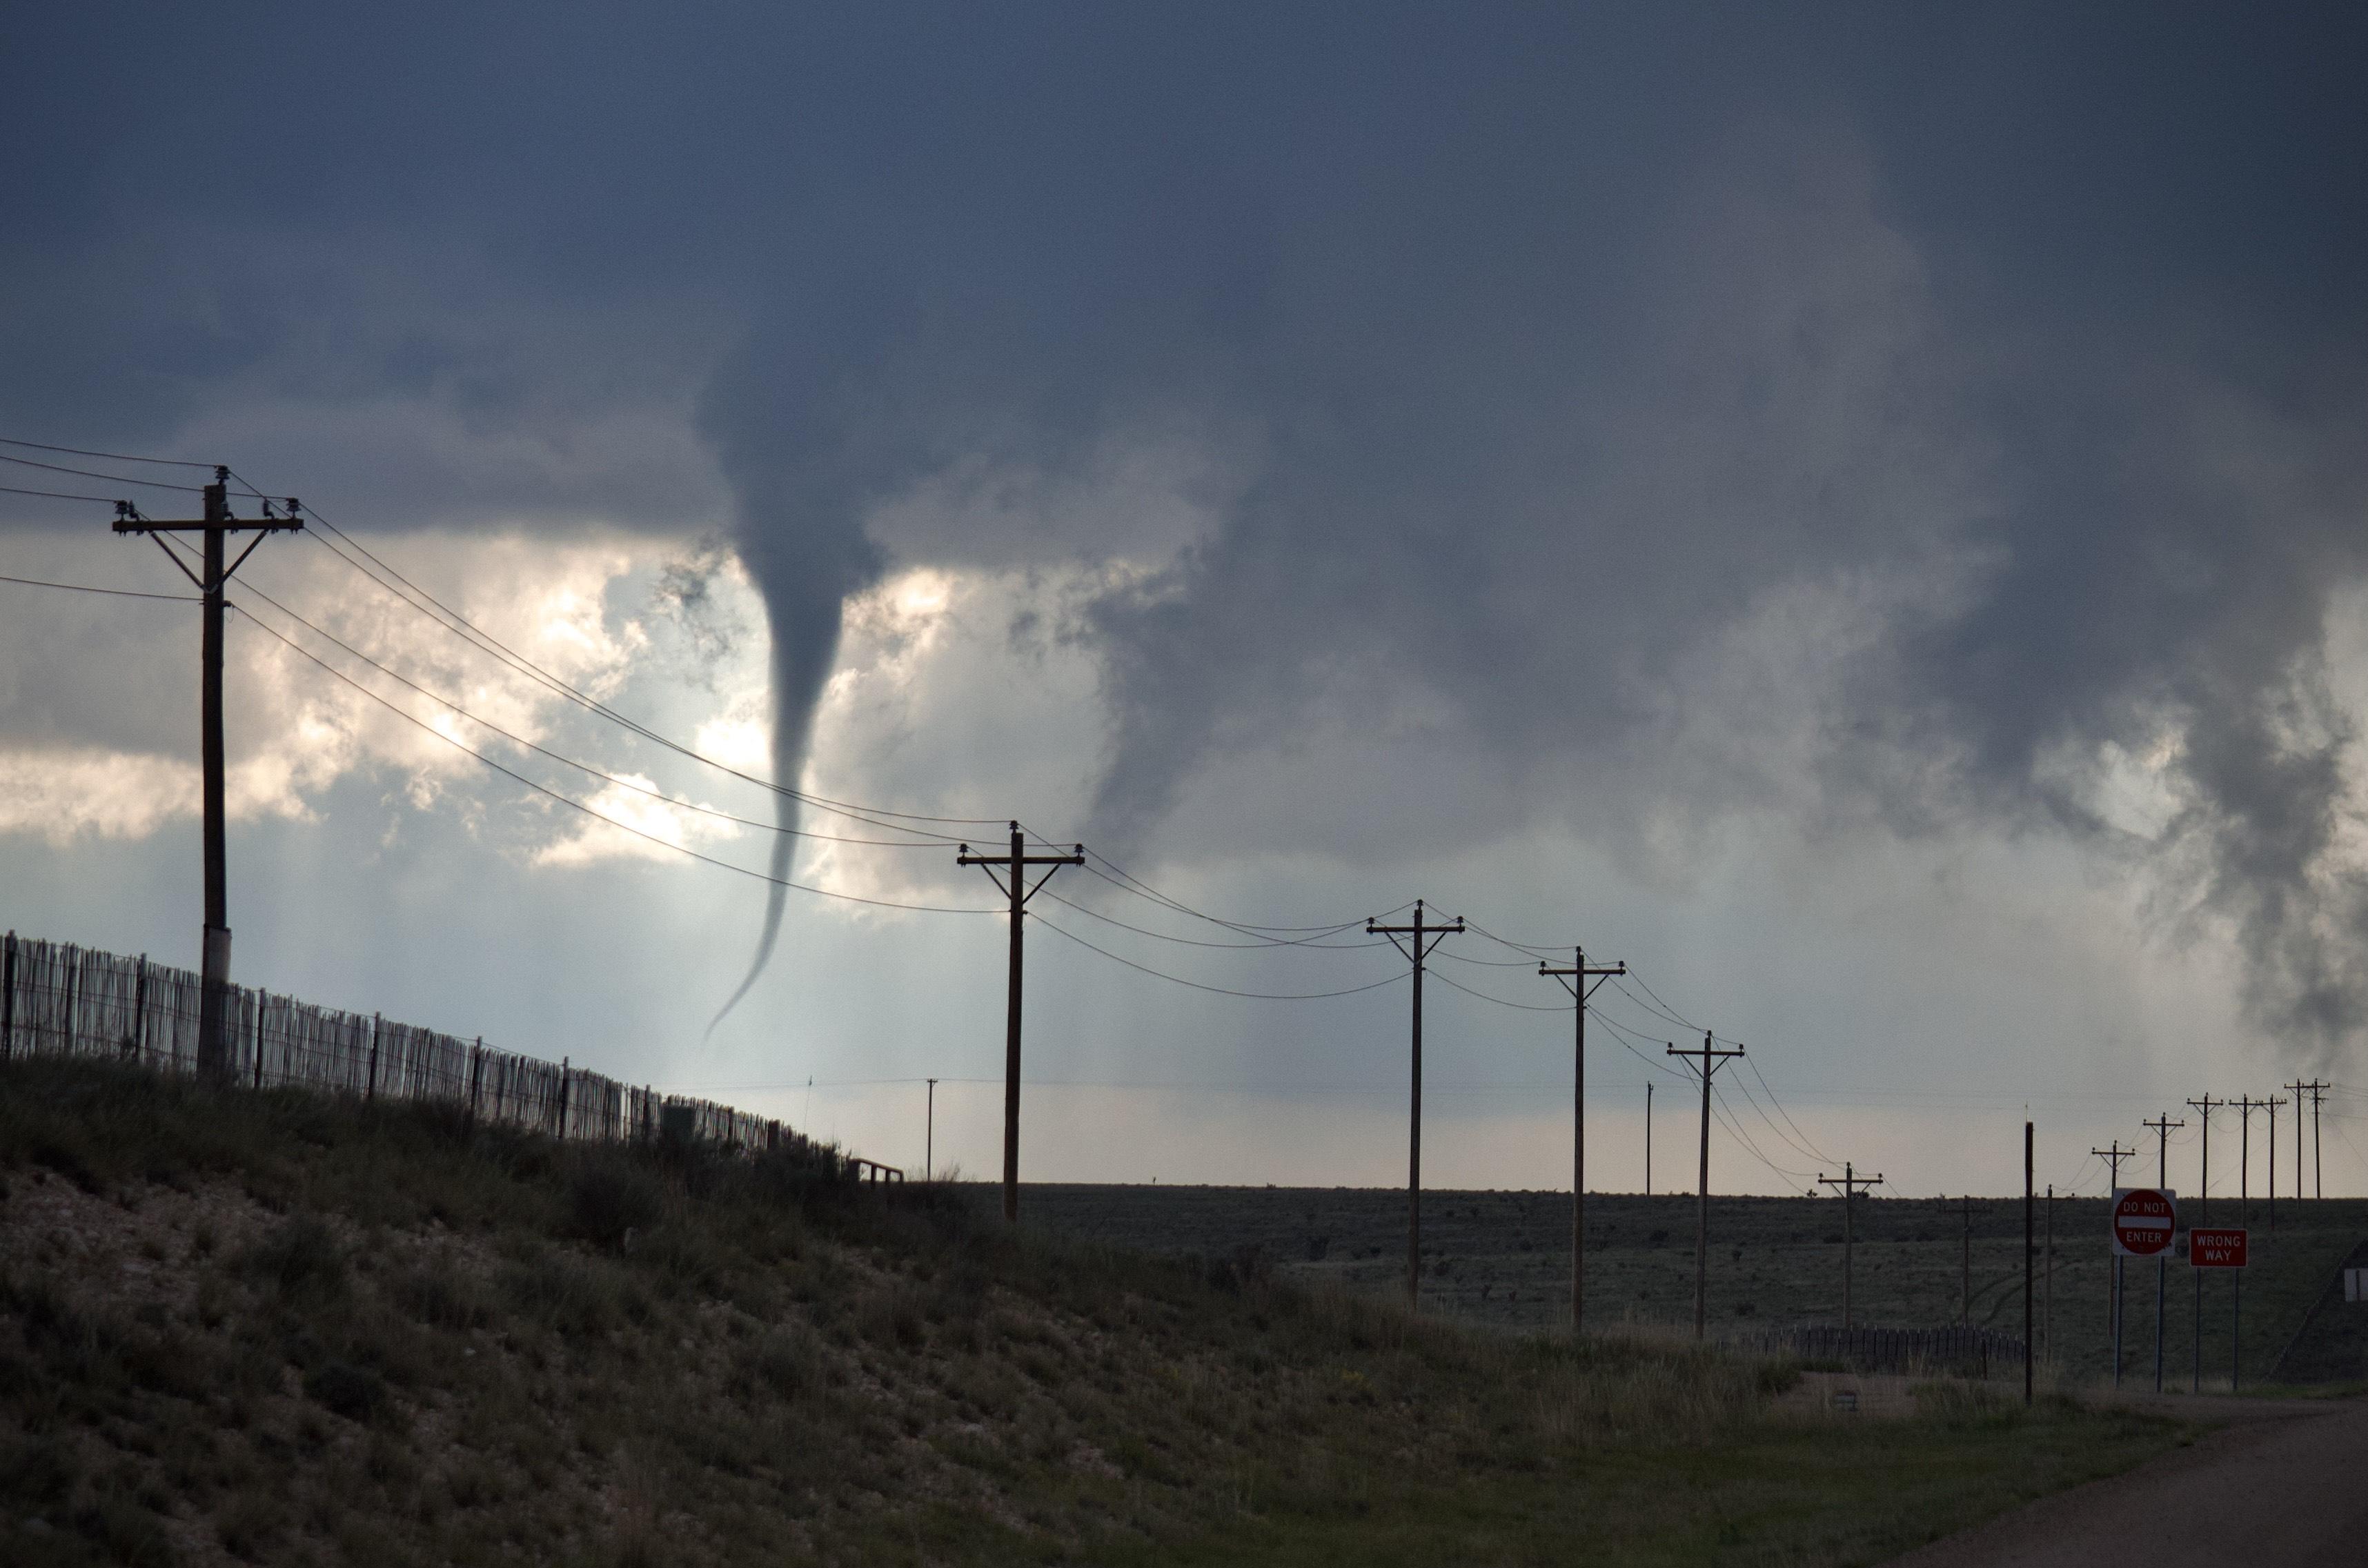 Funnel cloud in a stormy sky near the Texas Panhandle and eastern New Mexico.